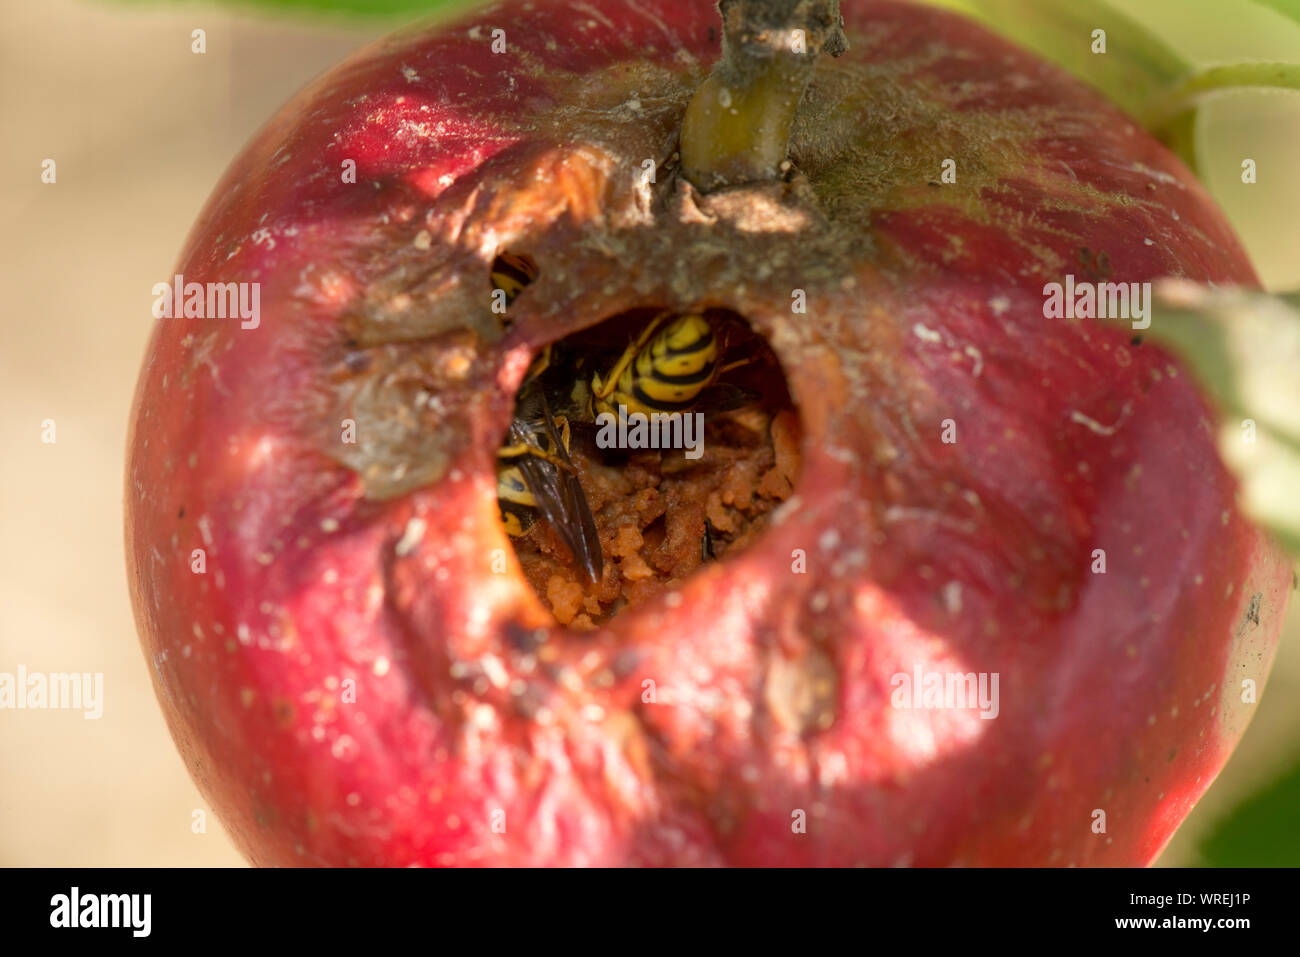 Ripe discovery apple eaten from the inside by wasps (Vespula vulgaris) and earwigs (Forficula sp.) Berkshire, August leaving mummified skin on the tre Stock Photo